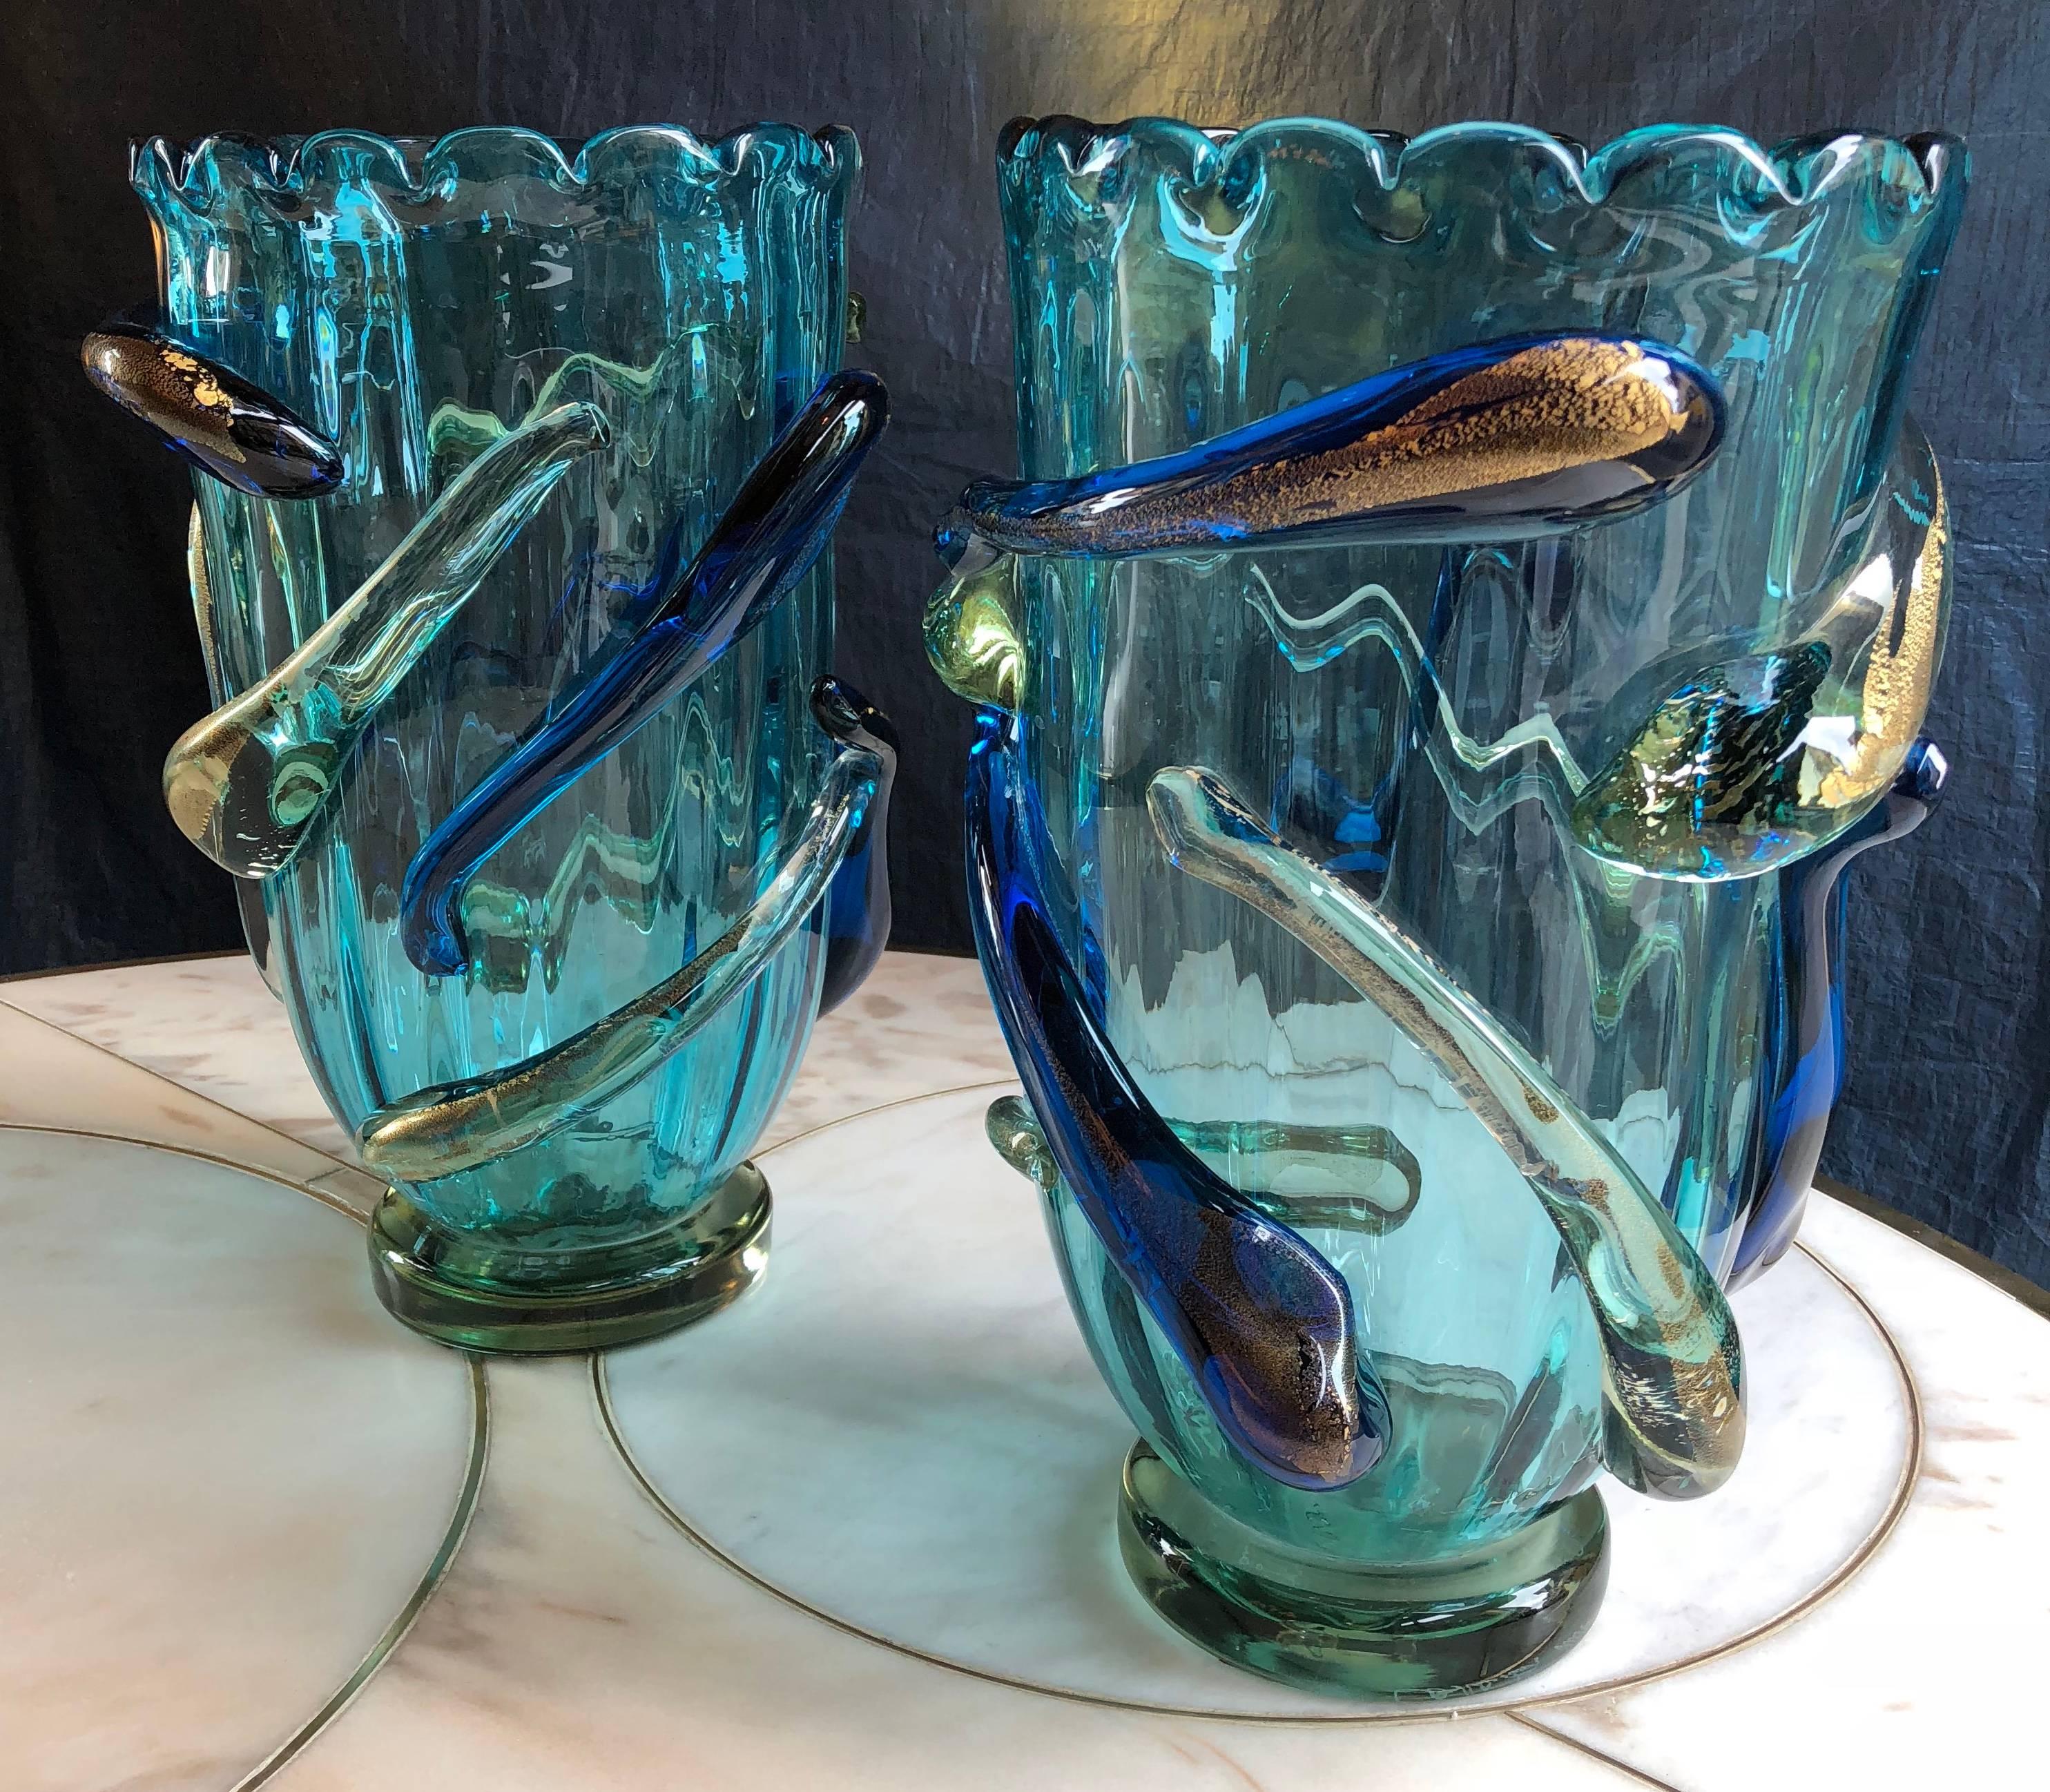 Mid-Century Modern Late 20th Century Pair of Turquoise Blue & Gold Murano Glass Vases by Costantini